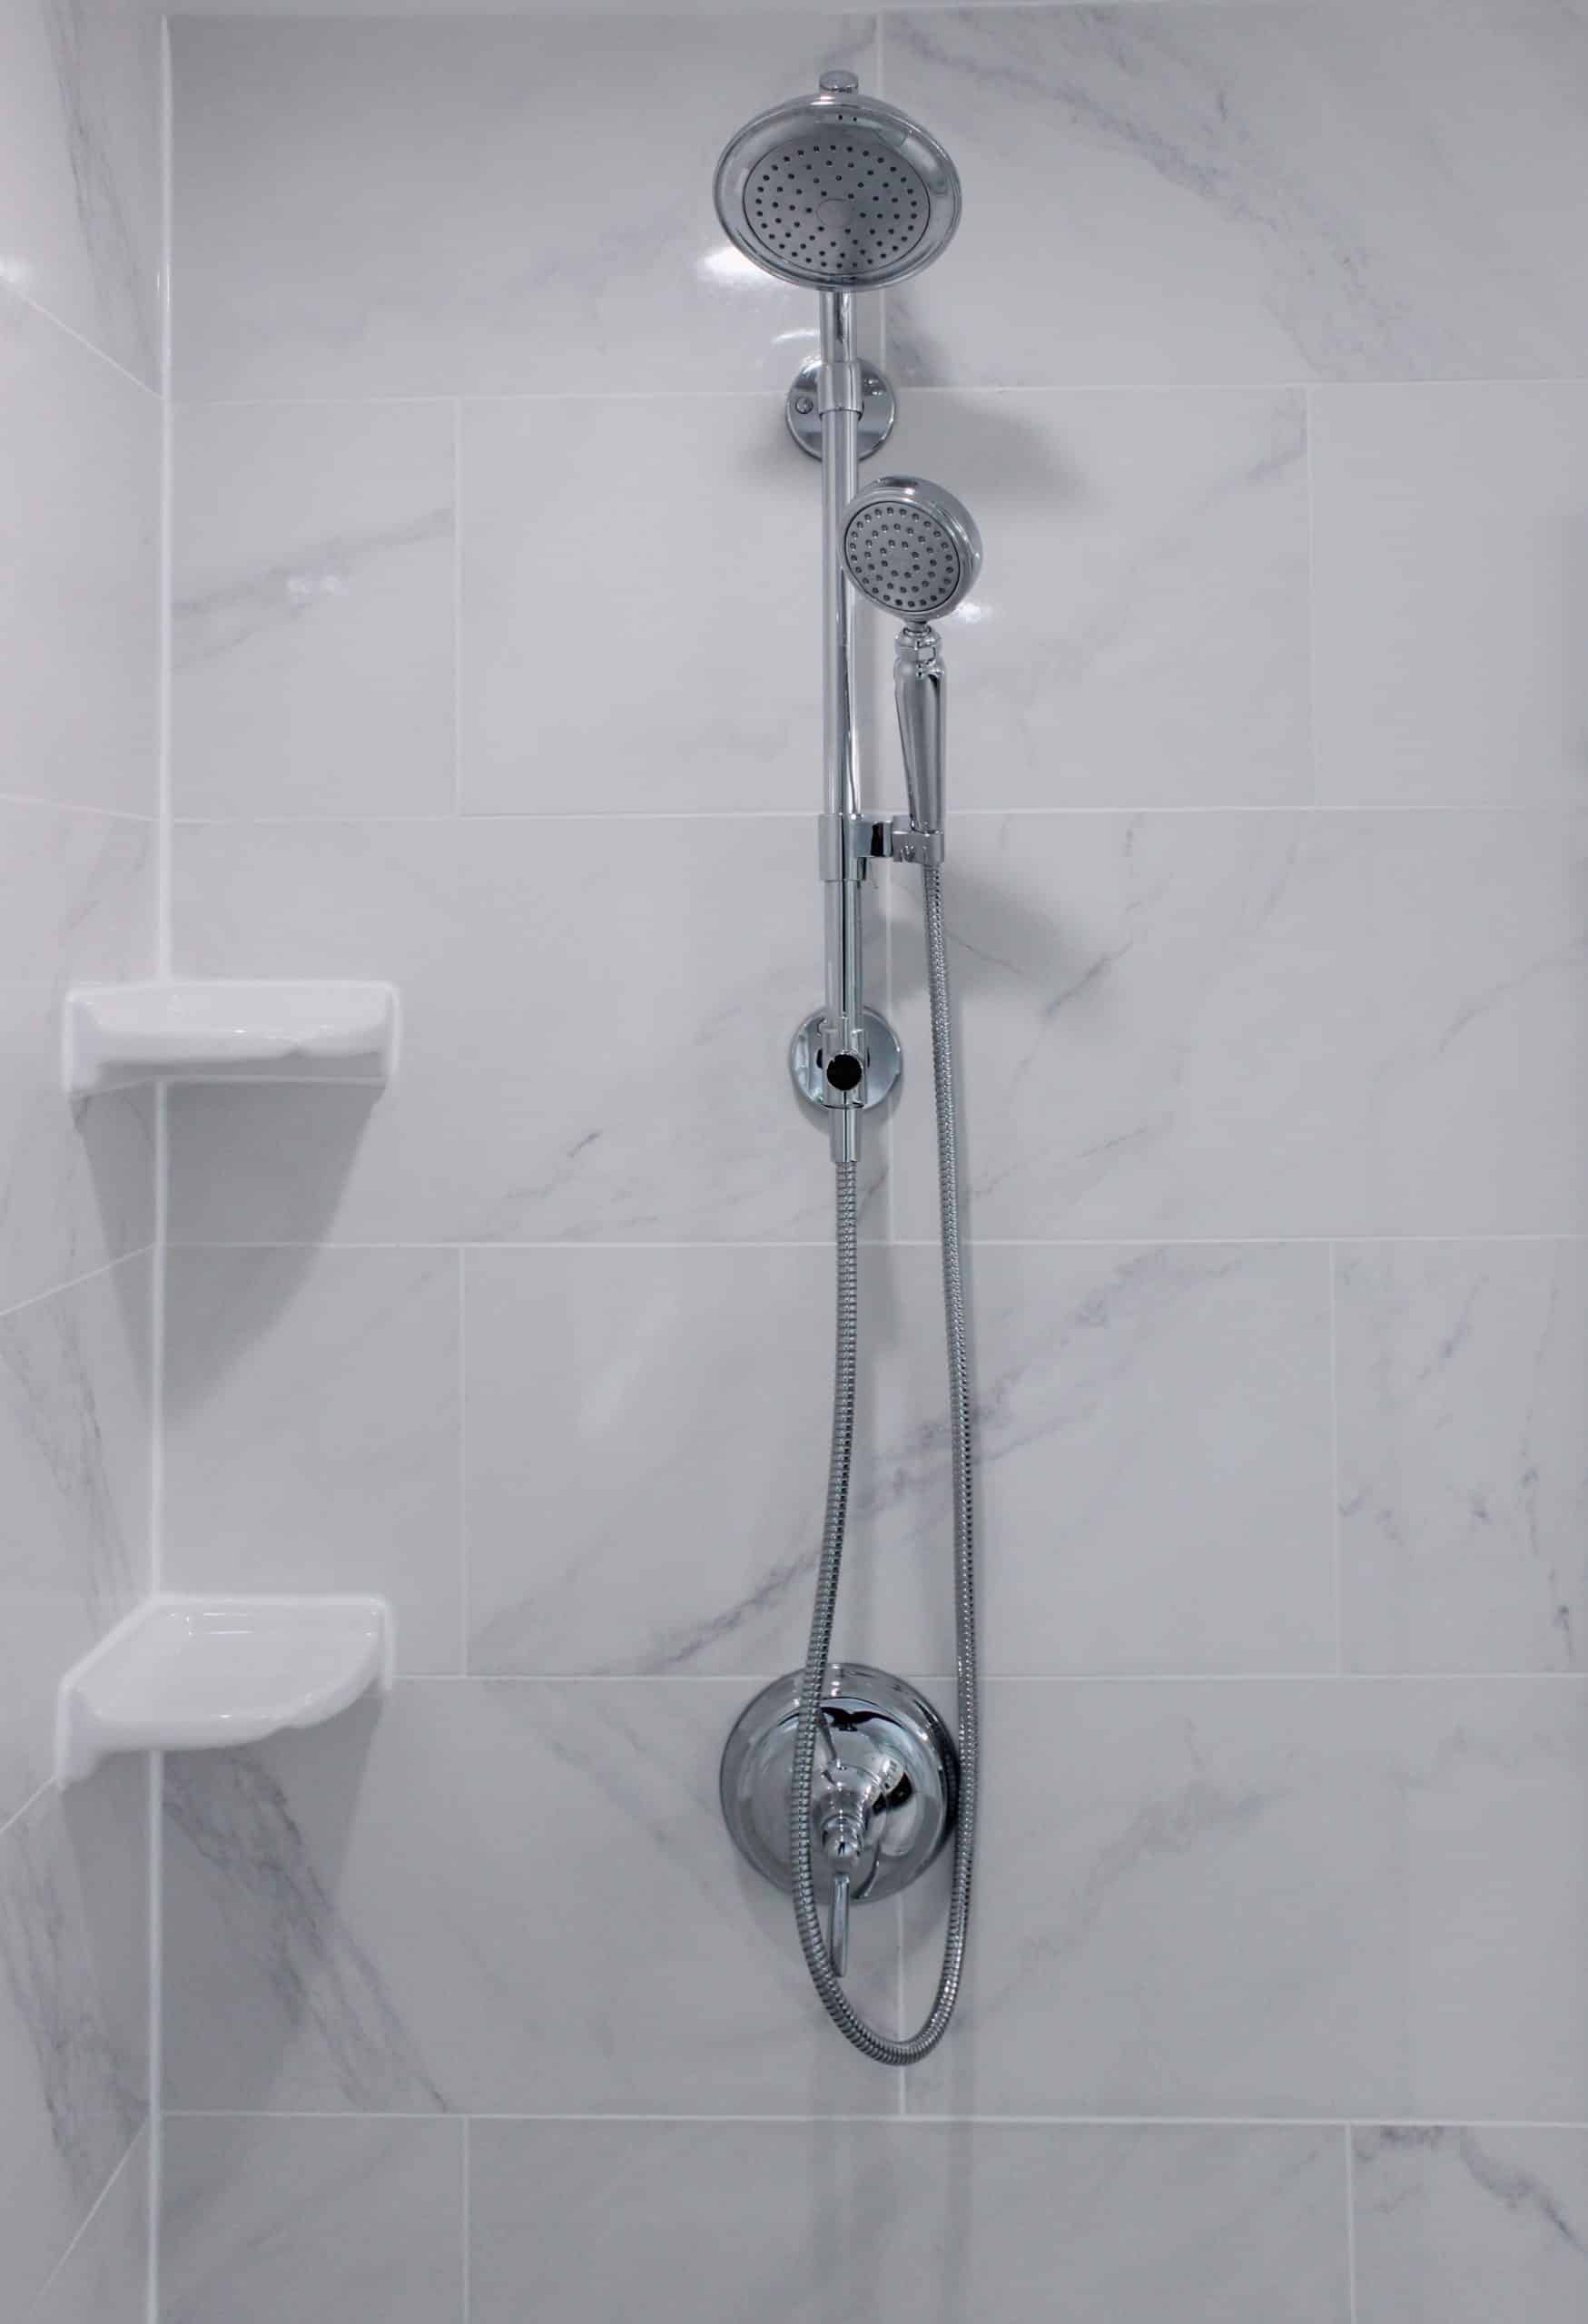 Shower fixture used in the project